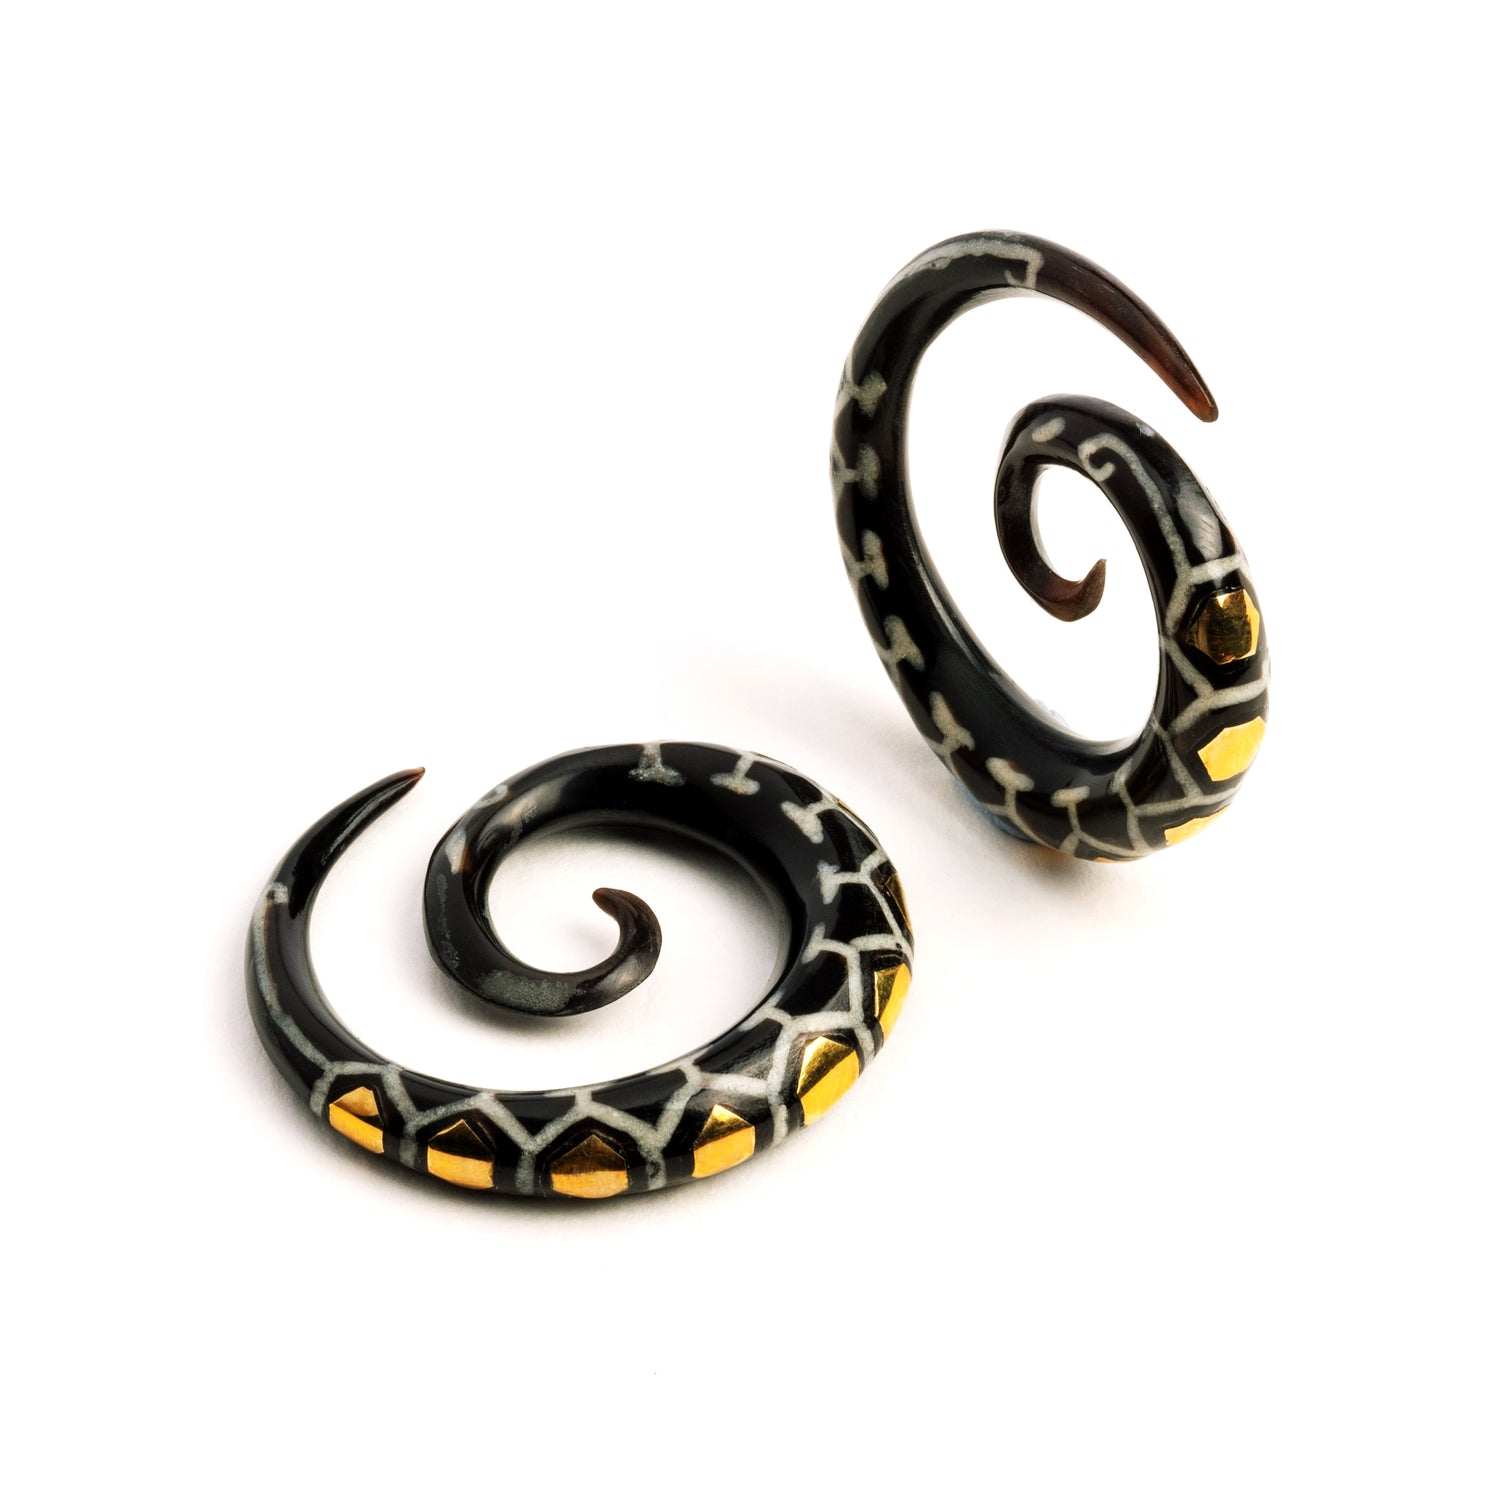 pair of honeycomb spiral ear gauges front and side view